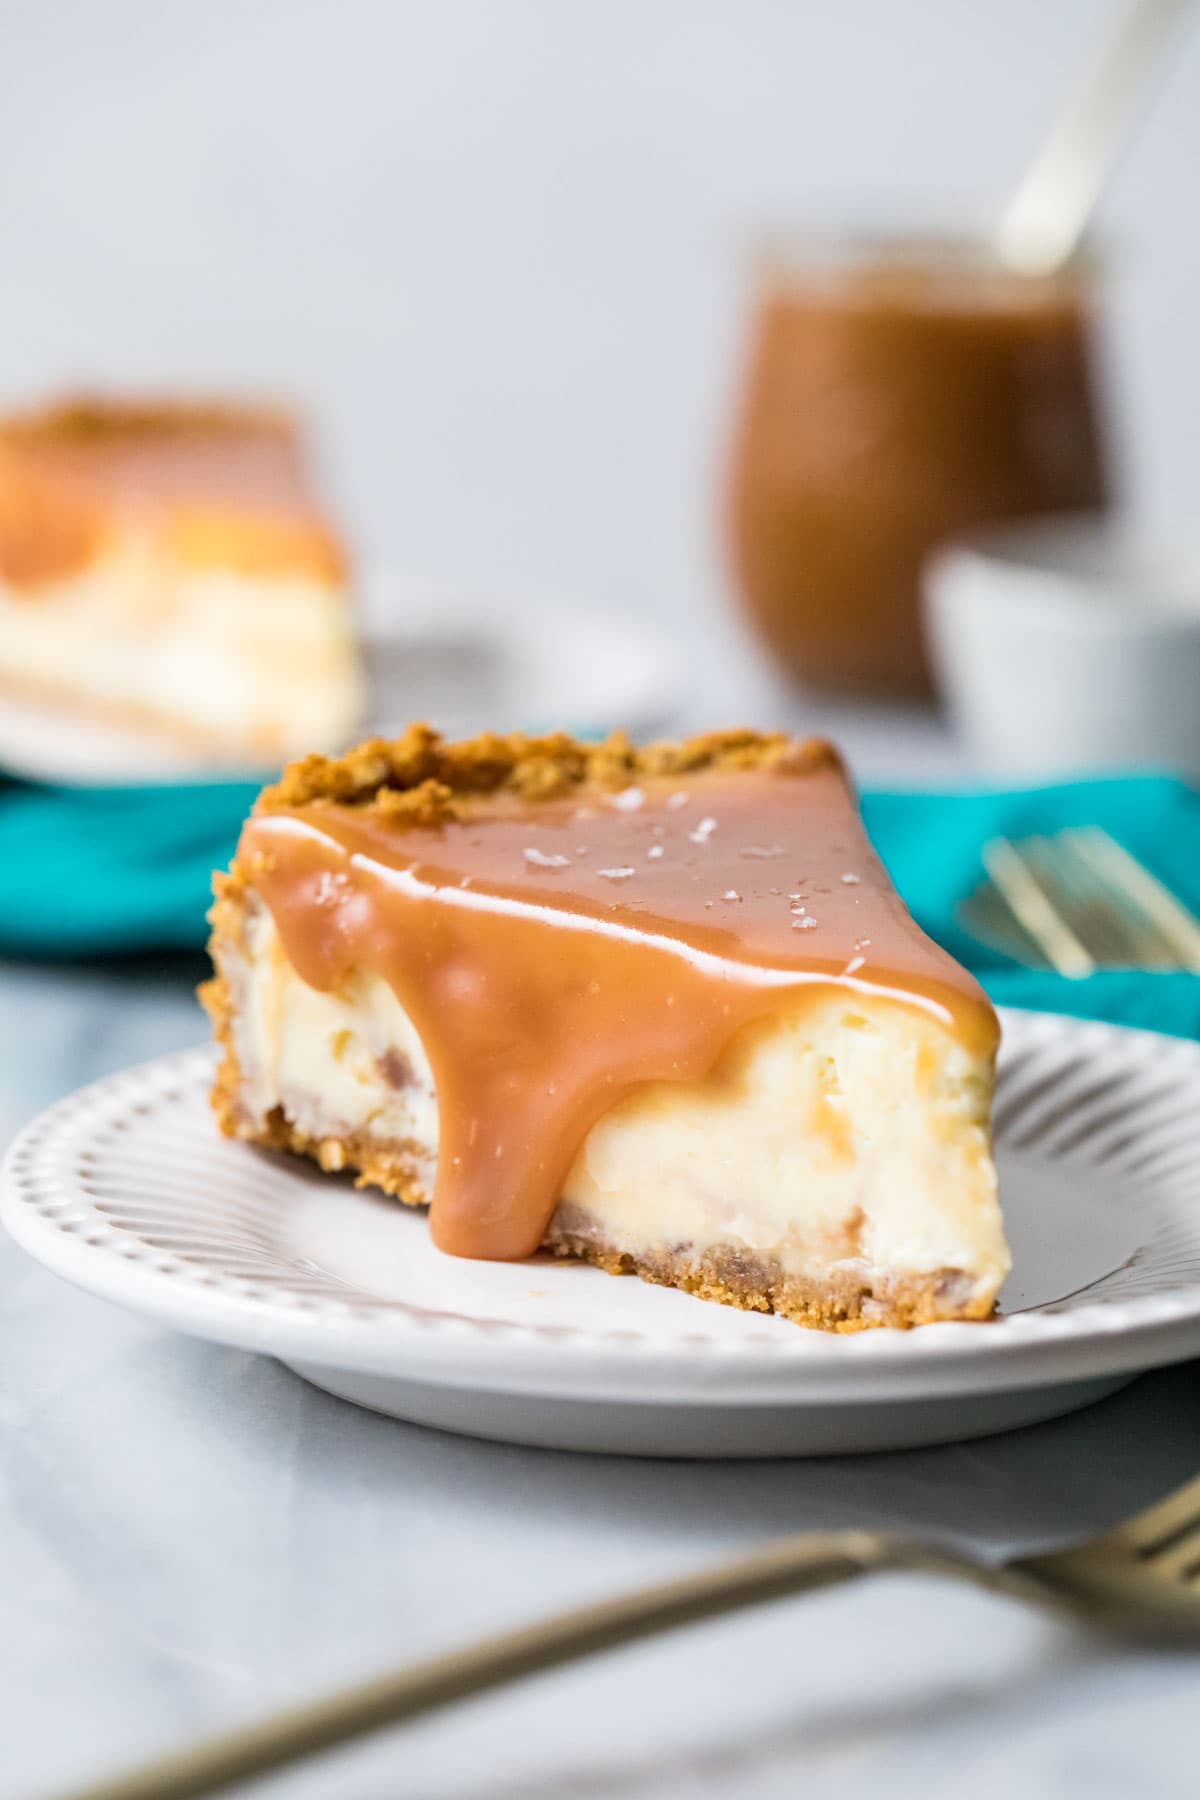 Slice of salted caramel cheesecake topped with caramel sauce and sea salt on a plate.